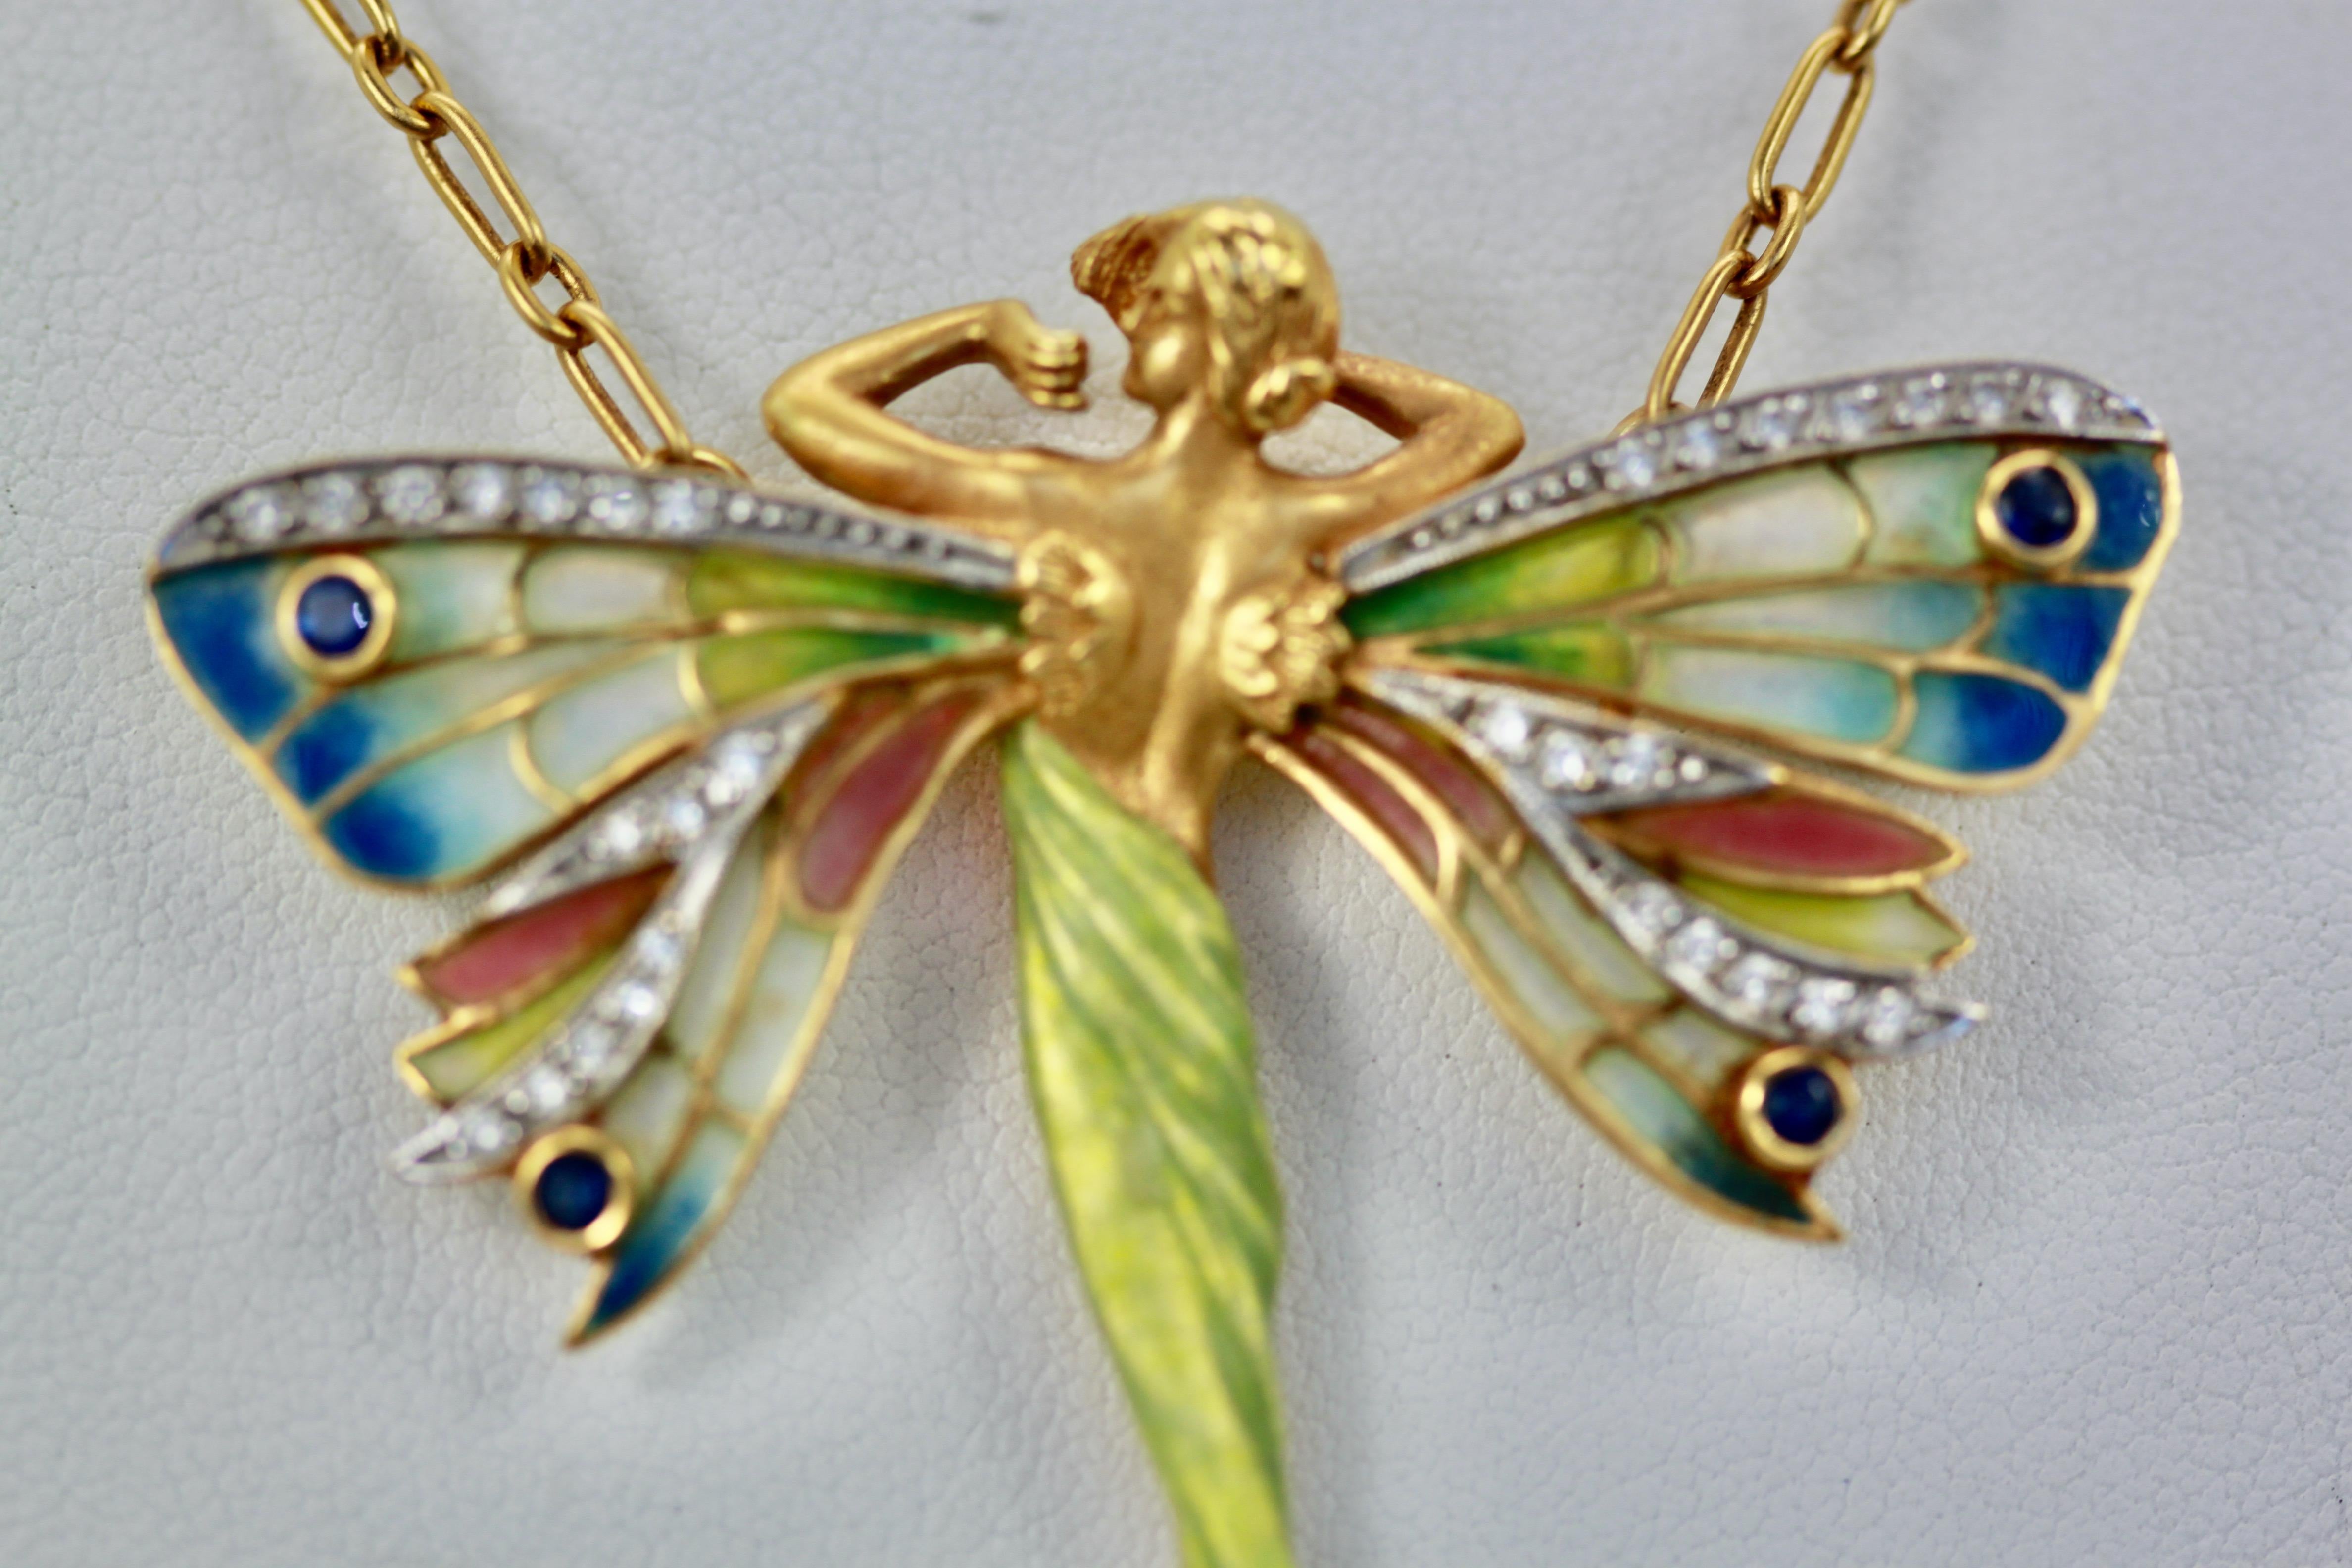 Masriera Plique a Jour Winged Lady Brooch and Pendant 1